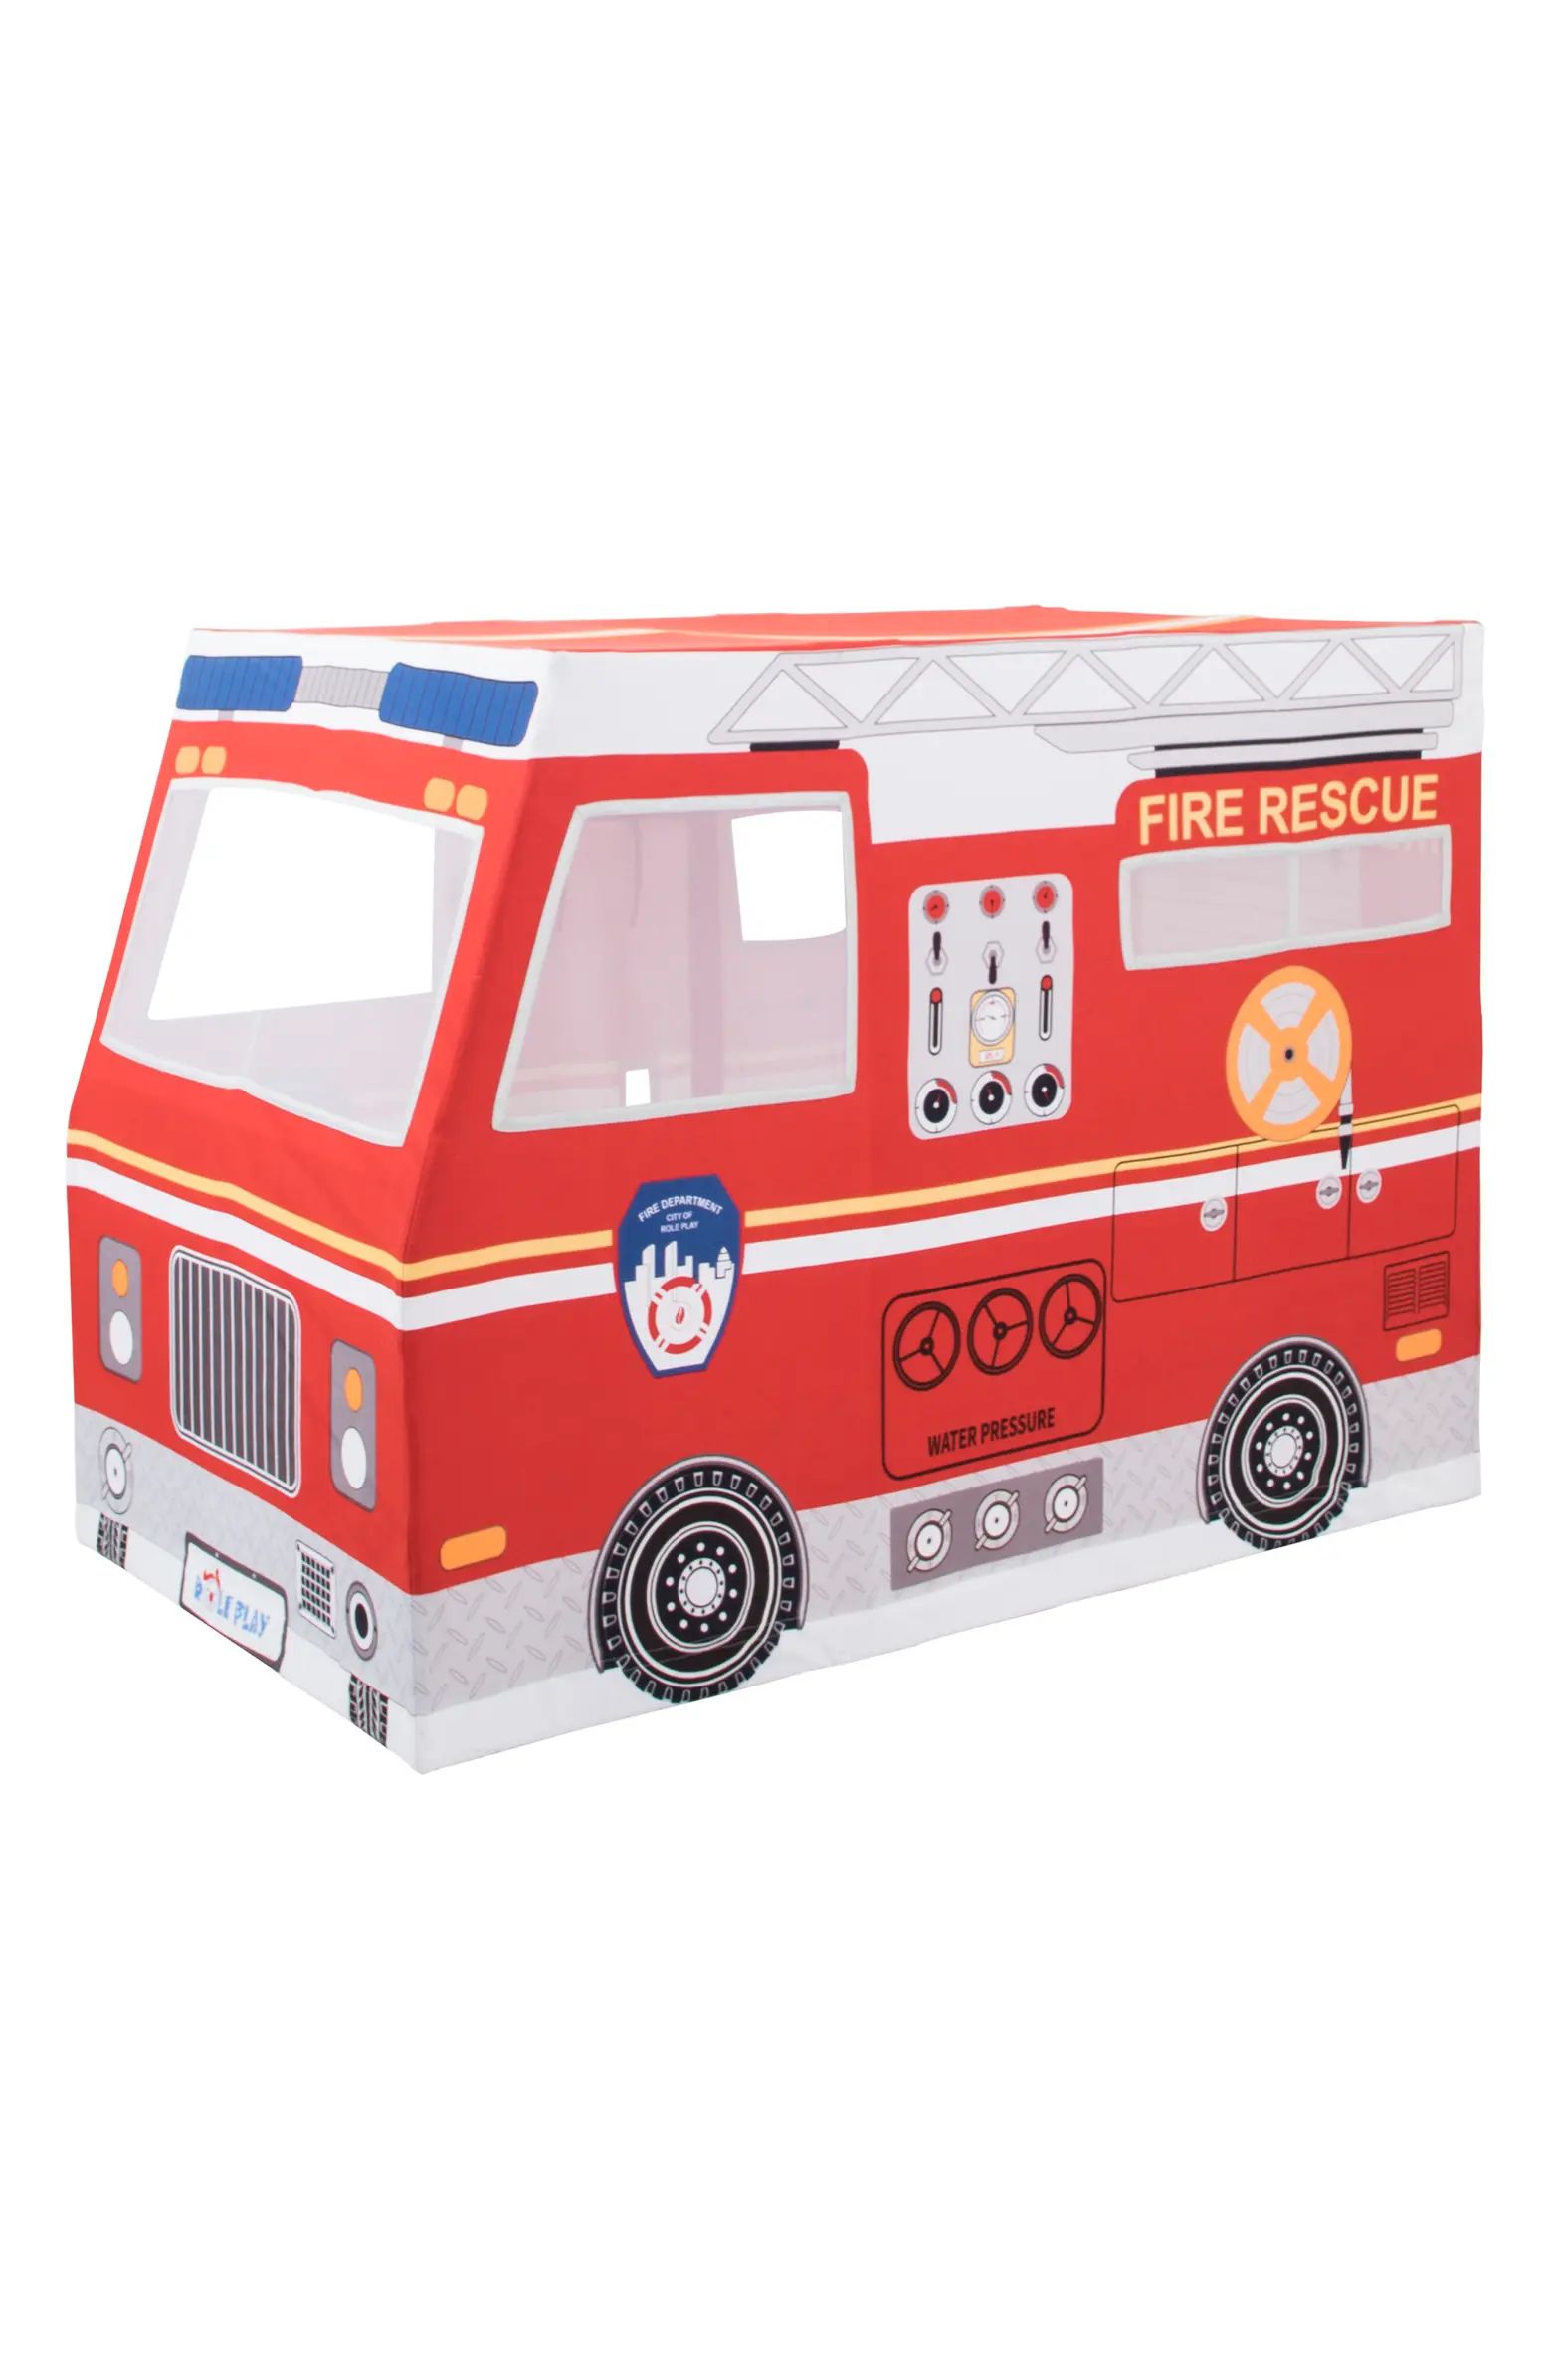 Fire Truck Play Tent | Nordstrom